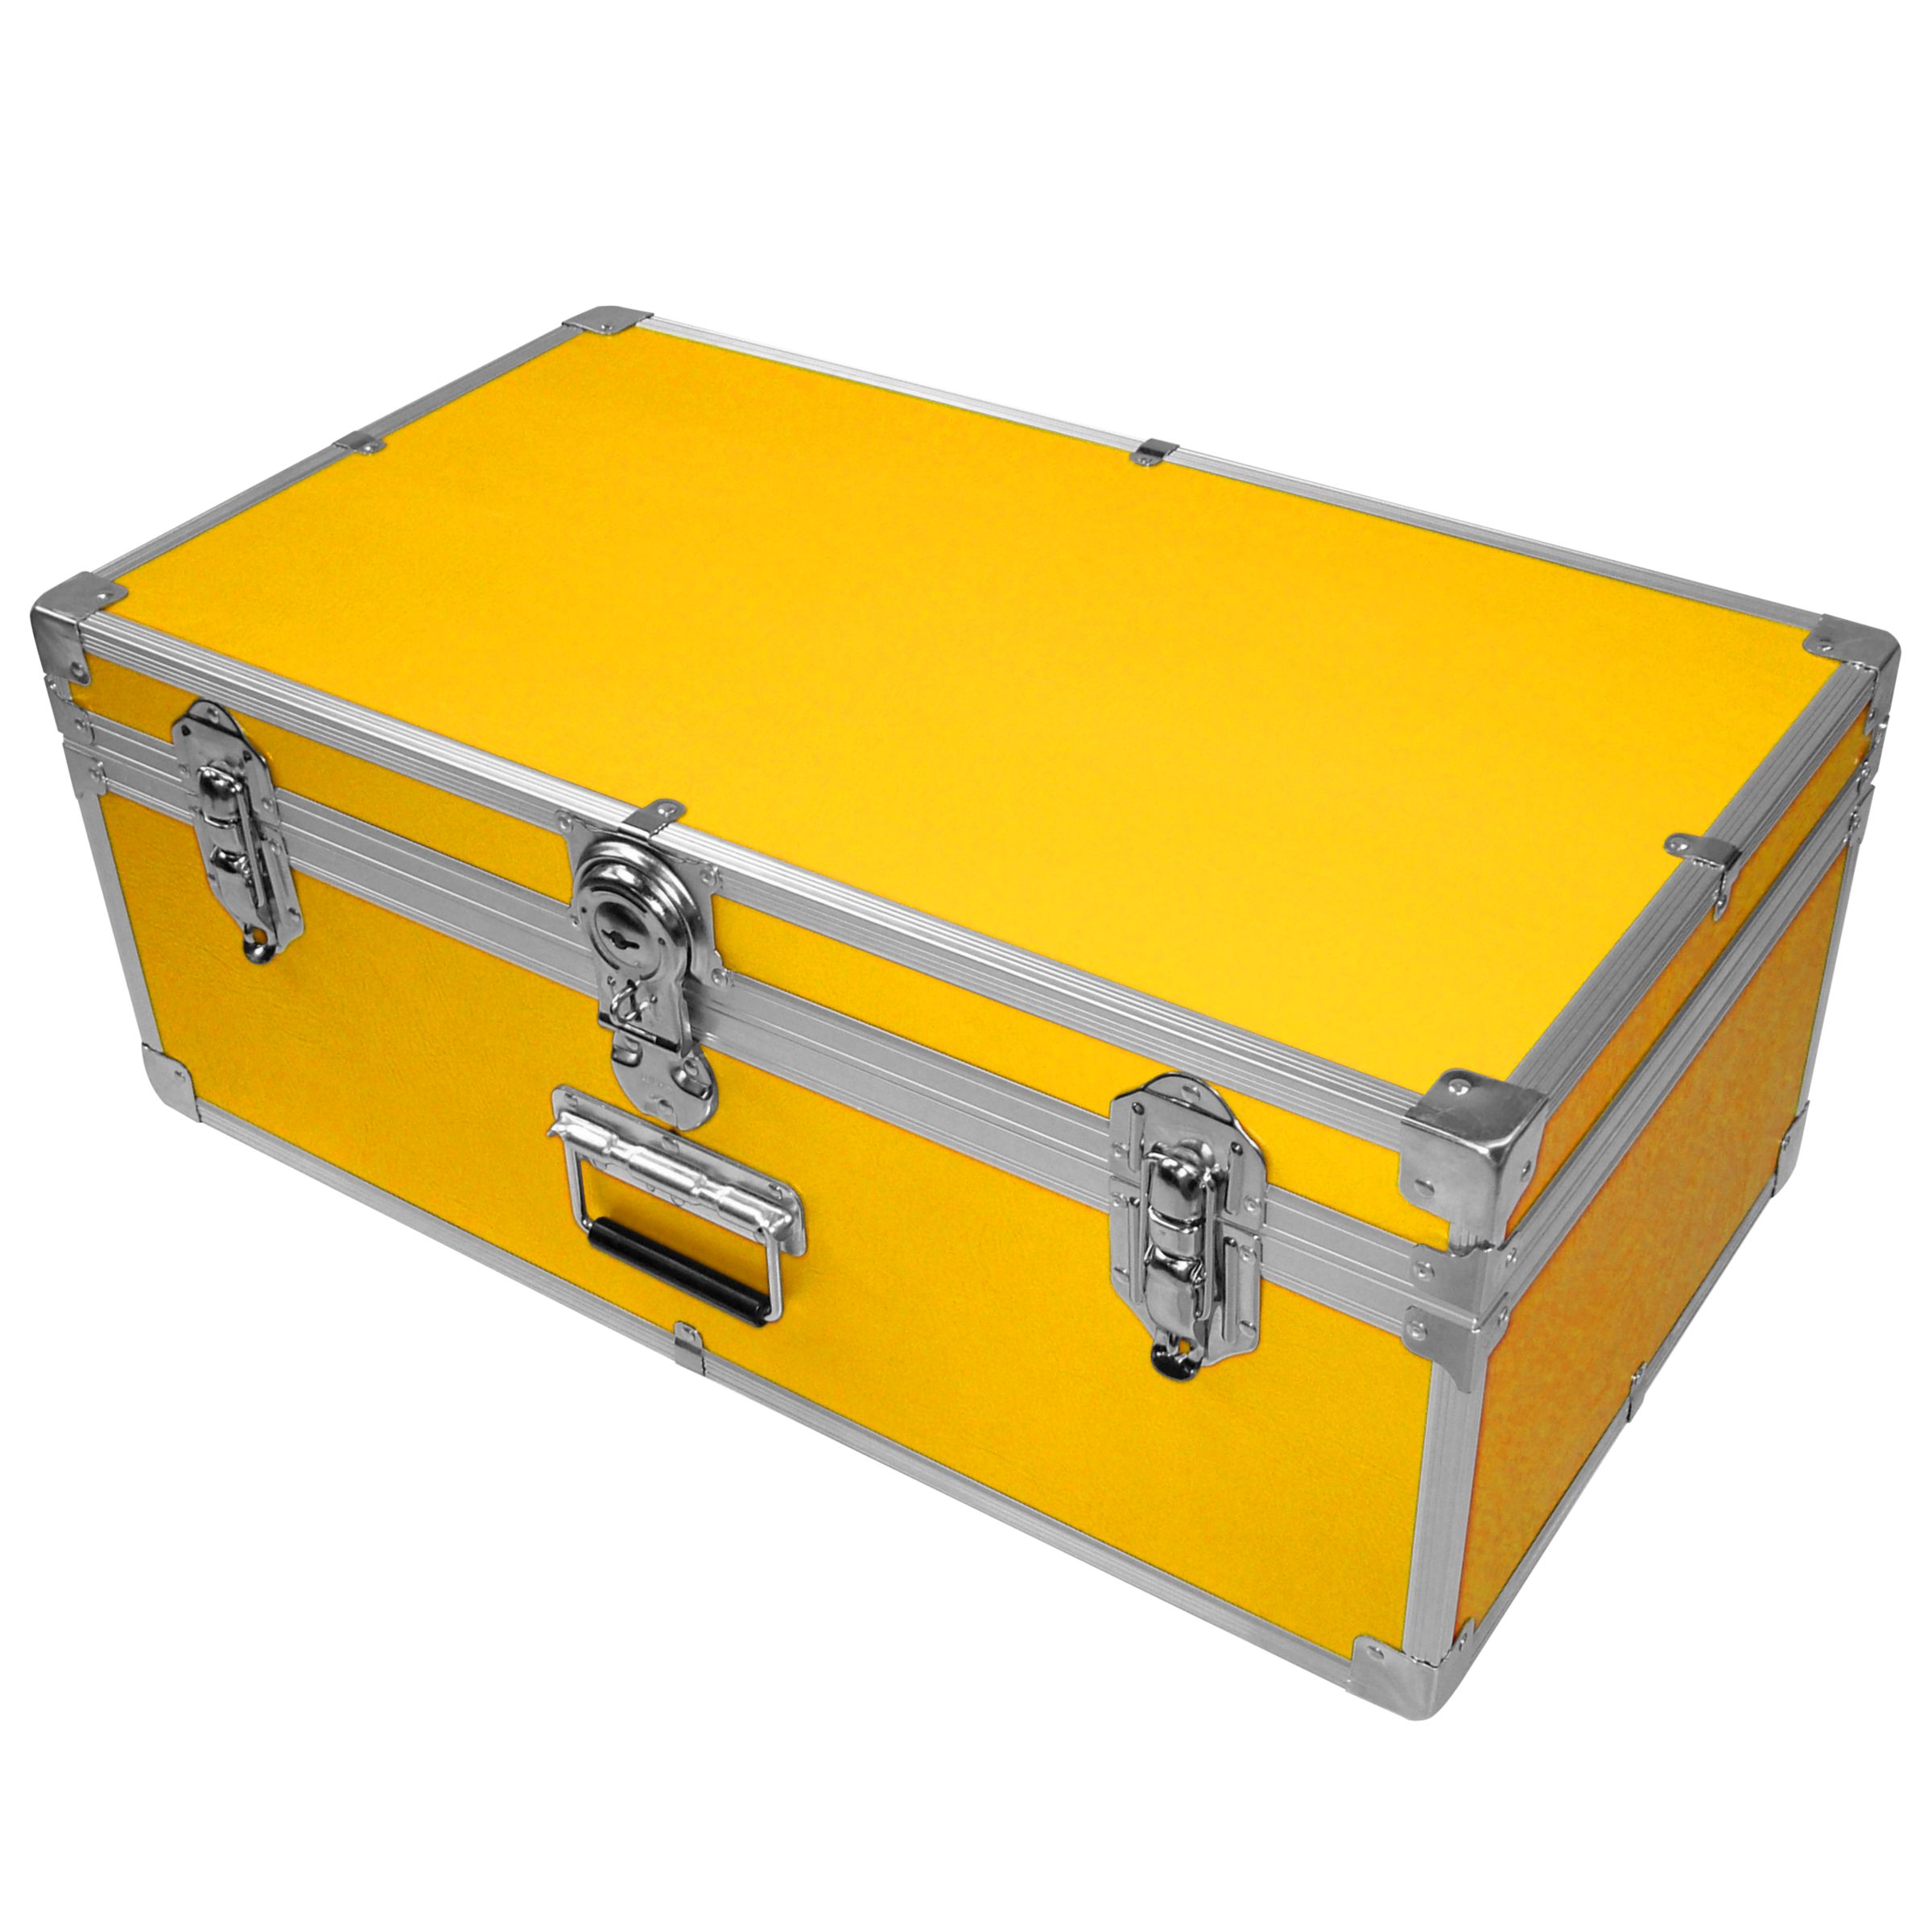 John Lewis Fortified Attache Trunk, Yellow at JohnLewis